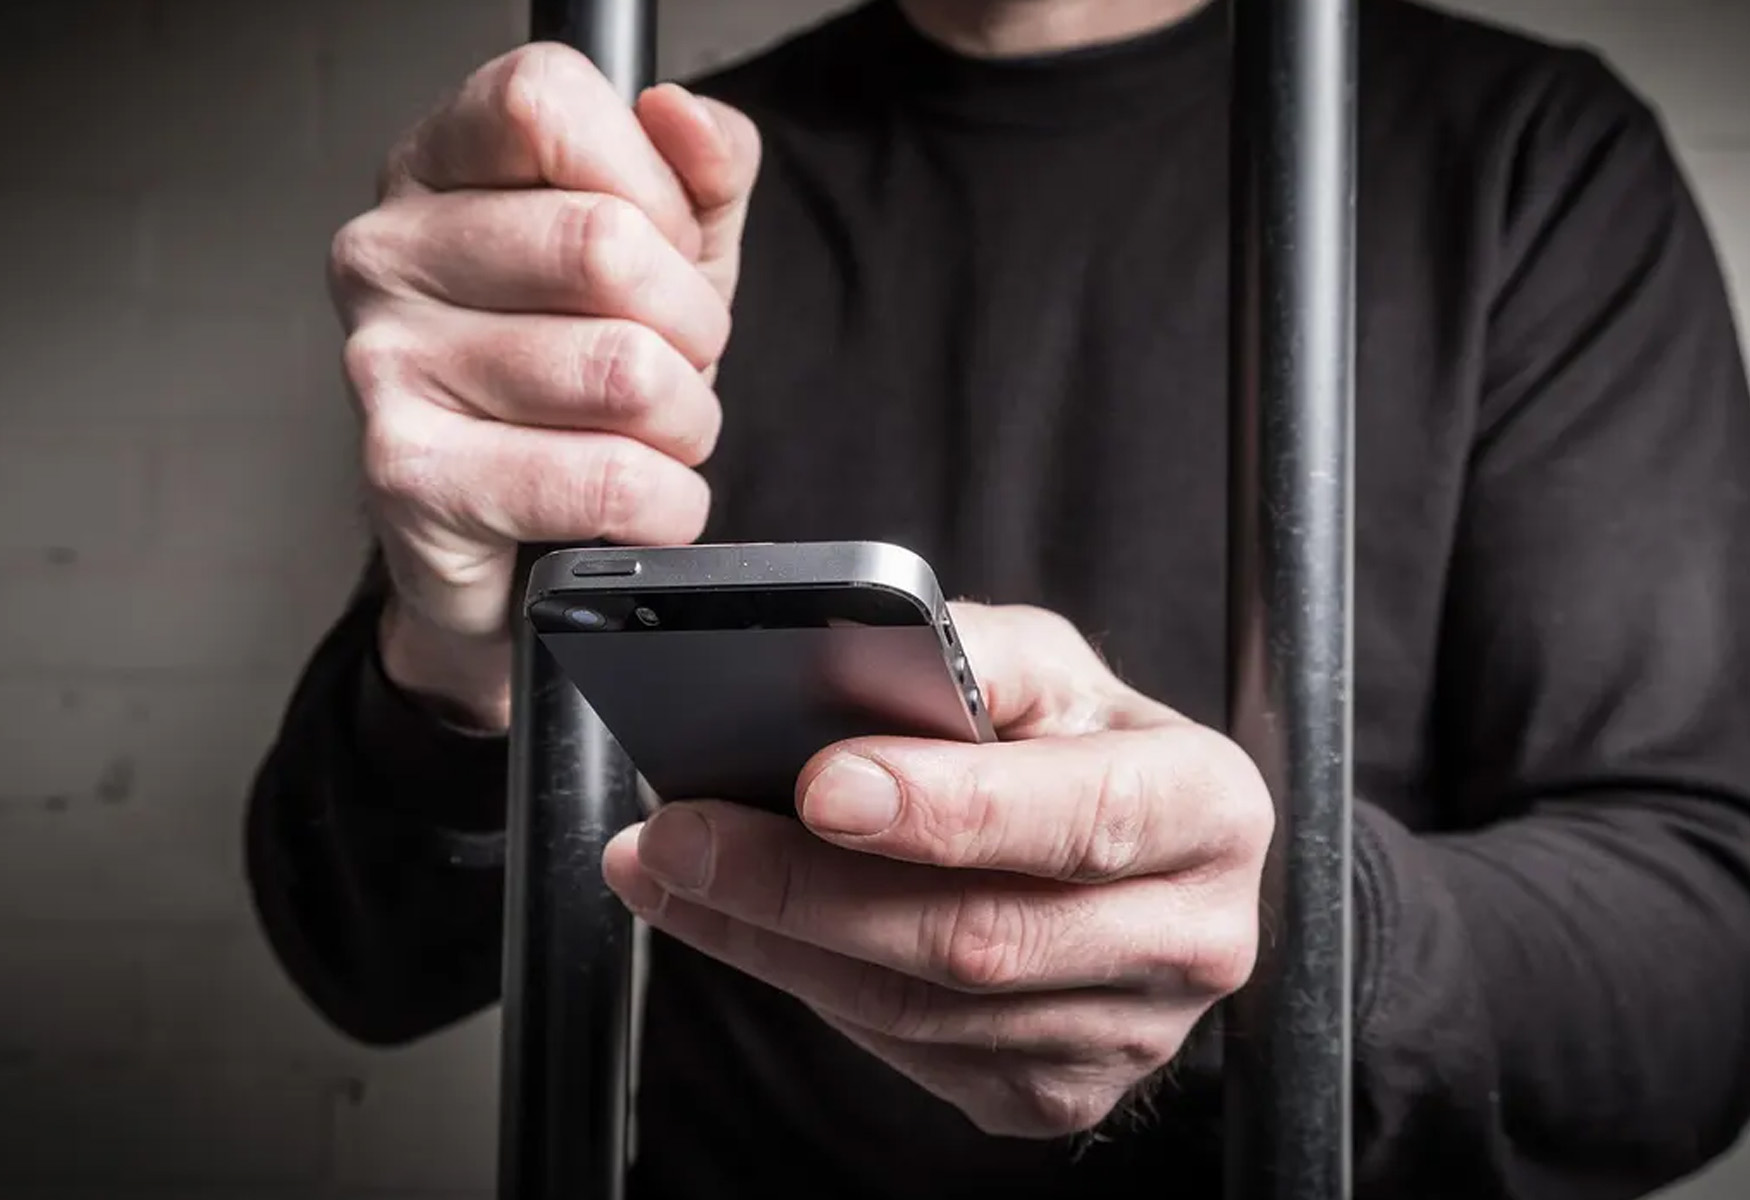 prisoners-busted-with-contraband-cell-phones-during-national-emergency-alert-system-test